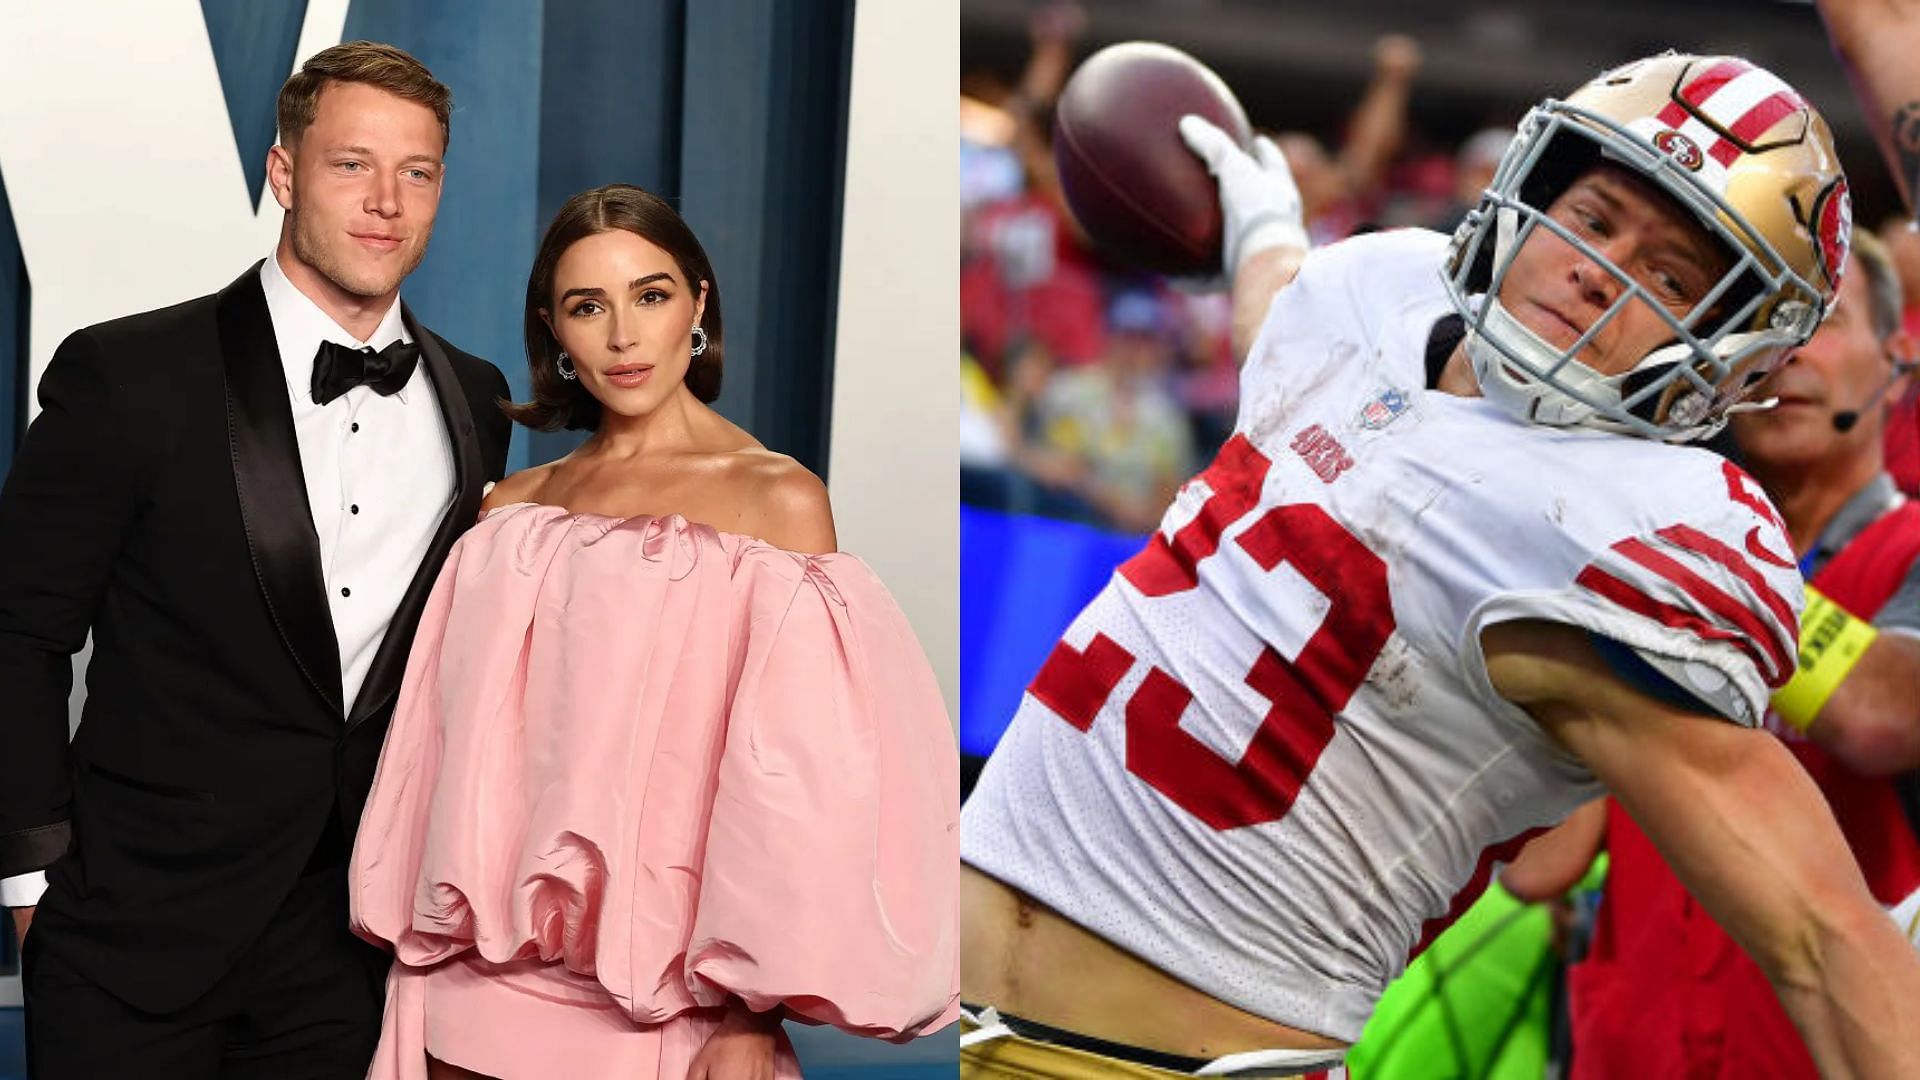 Olivia Culpo expresses her pride and affection for Christian McCaffrey.